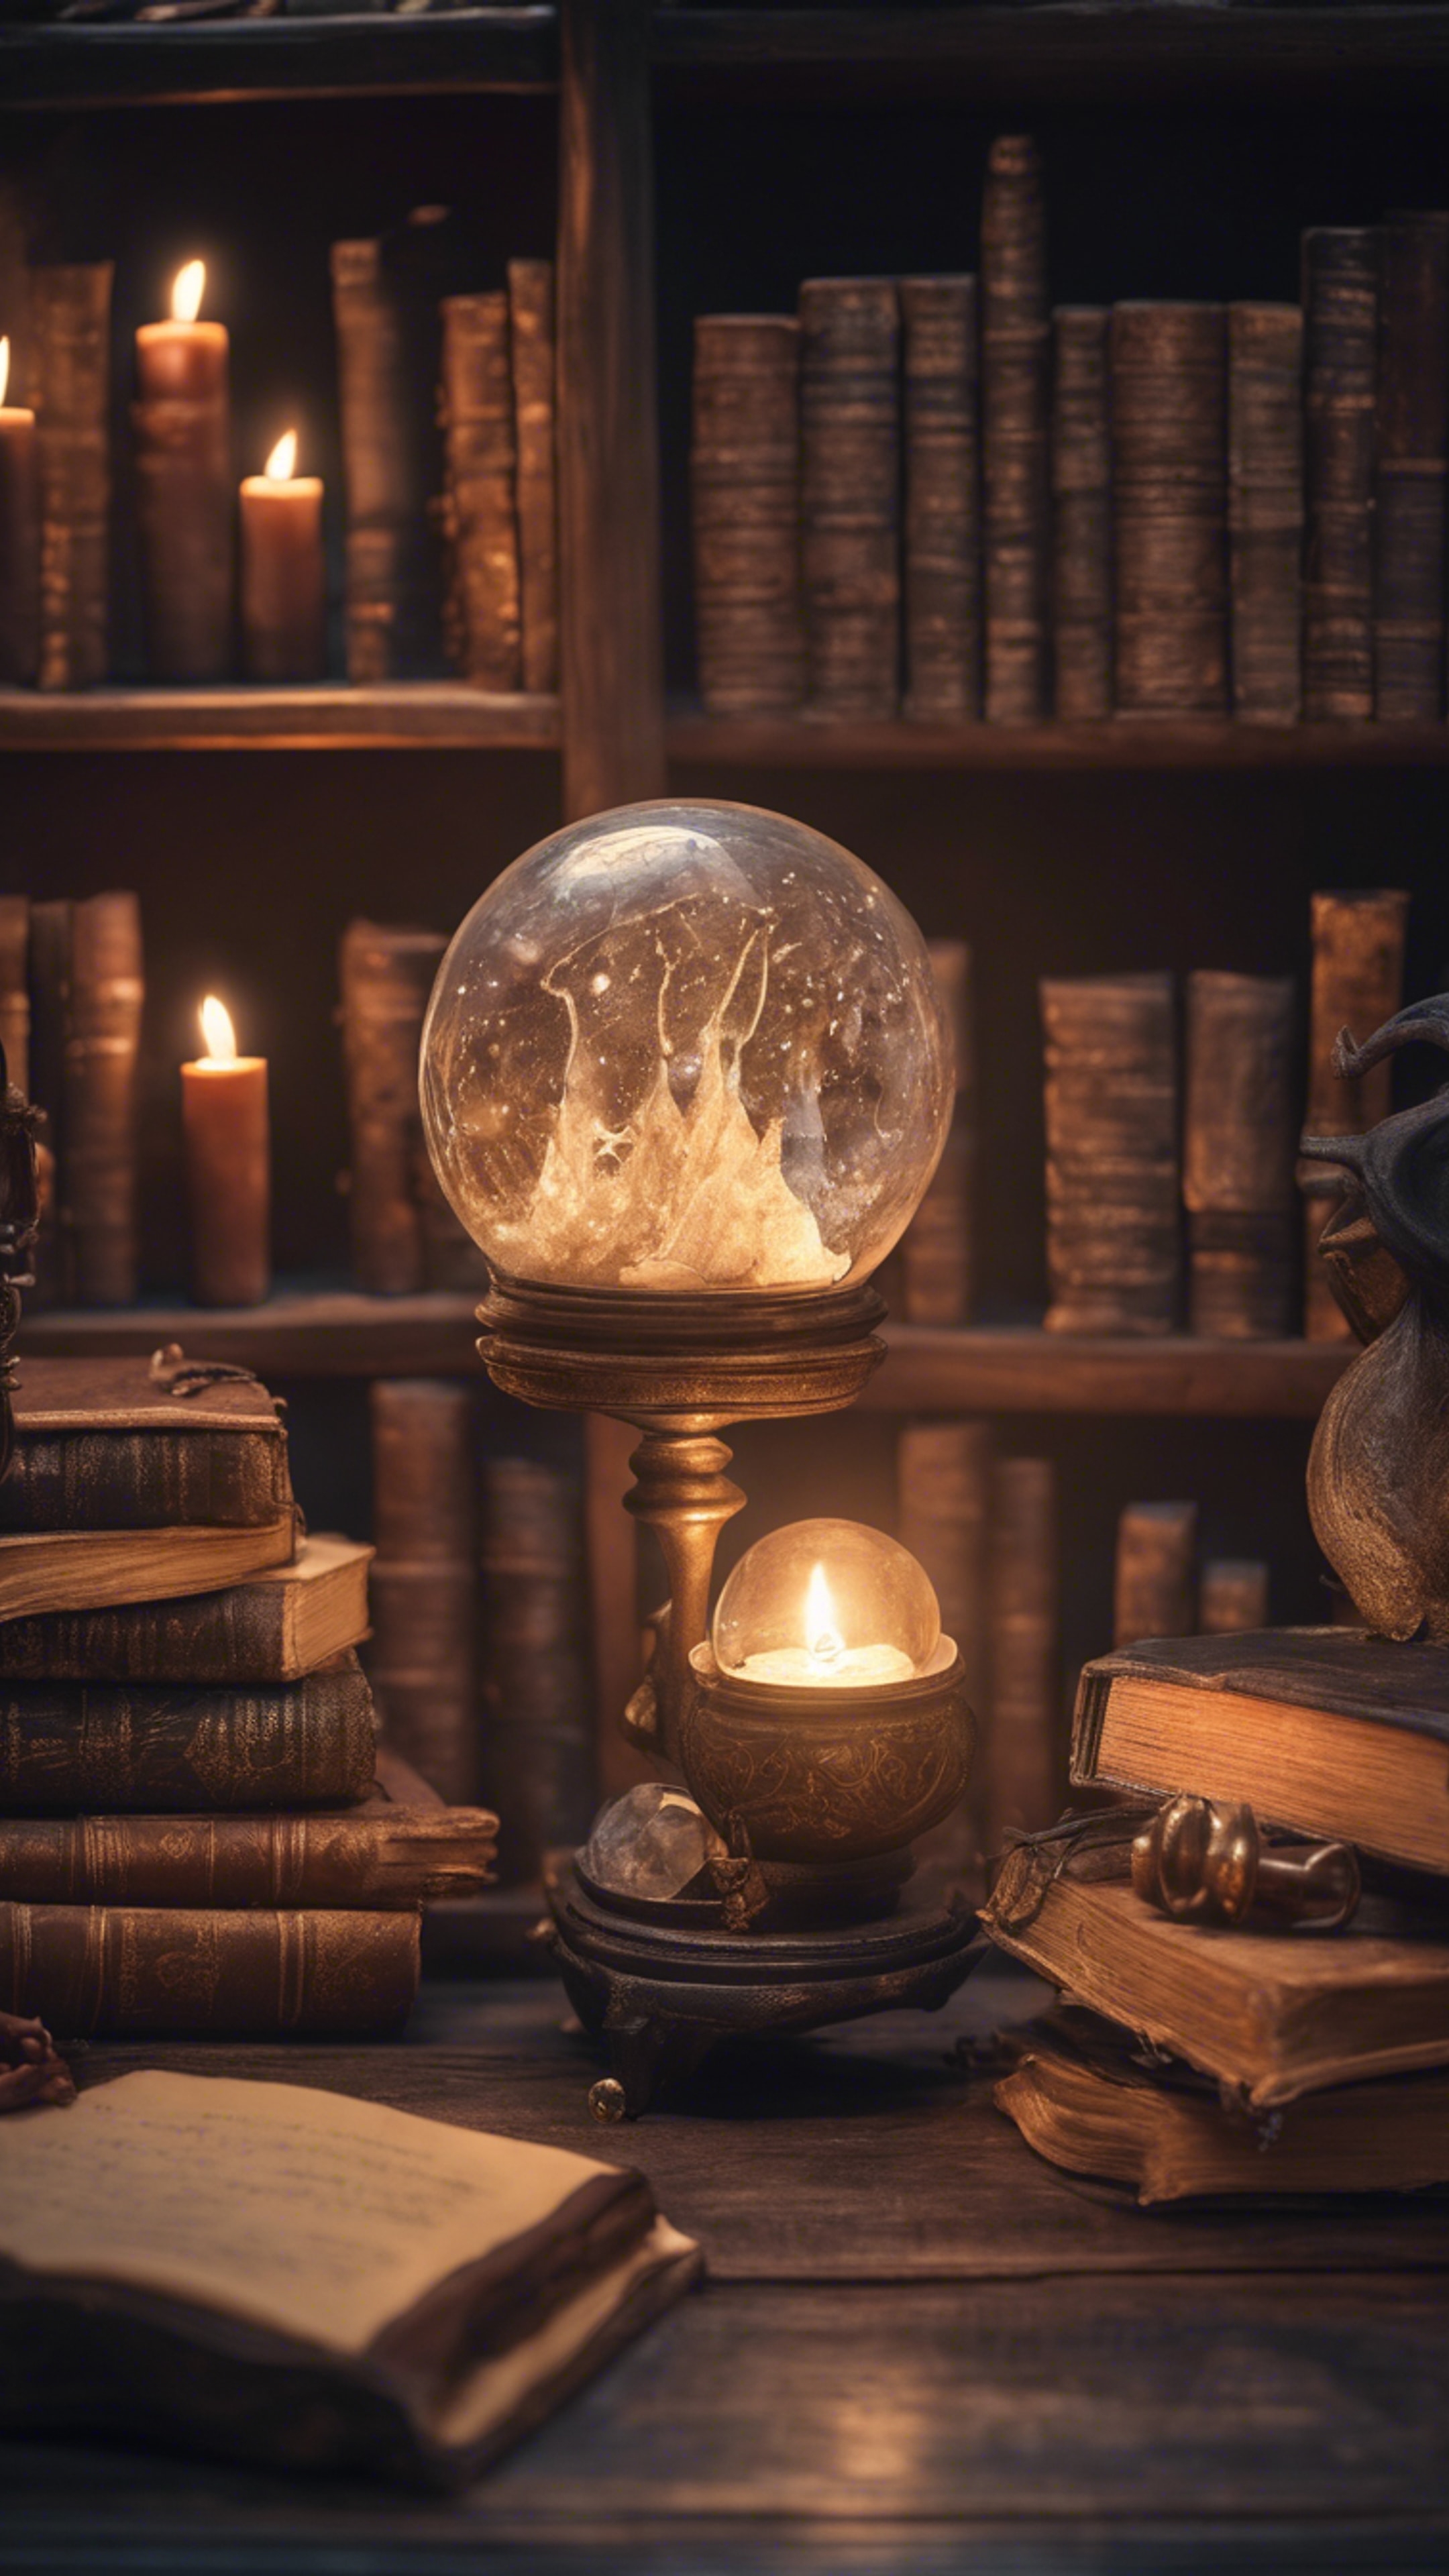 A cozy mystical scene with a wizard’s study room - magical artifacts, rows of spell books, a crystal ball, and a cauldron brewing a potion. Tapeta[df00e949c5584759a81e]